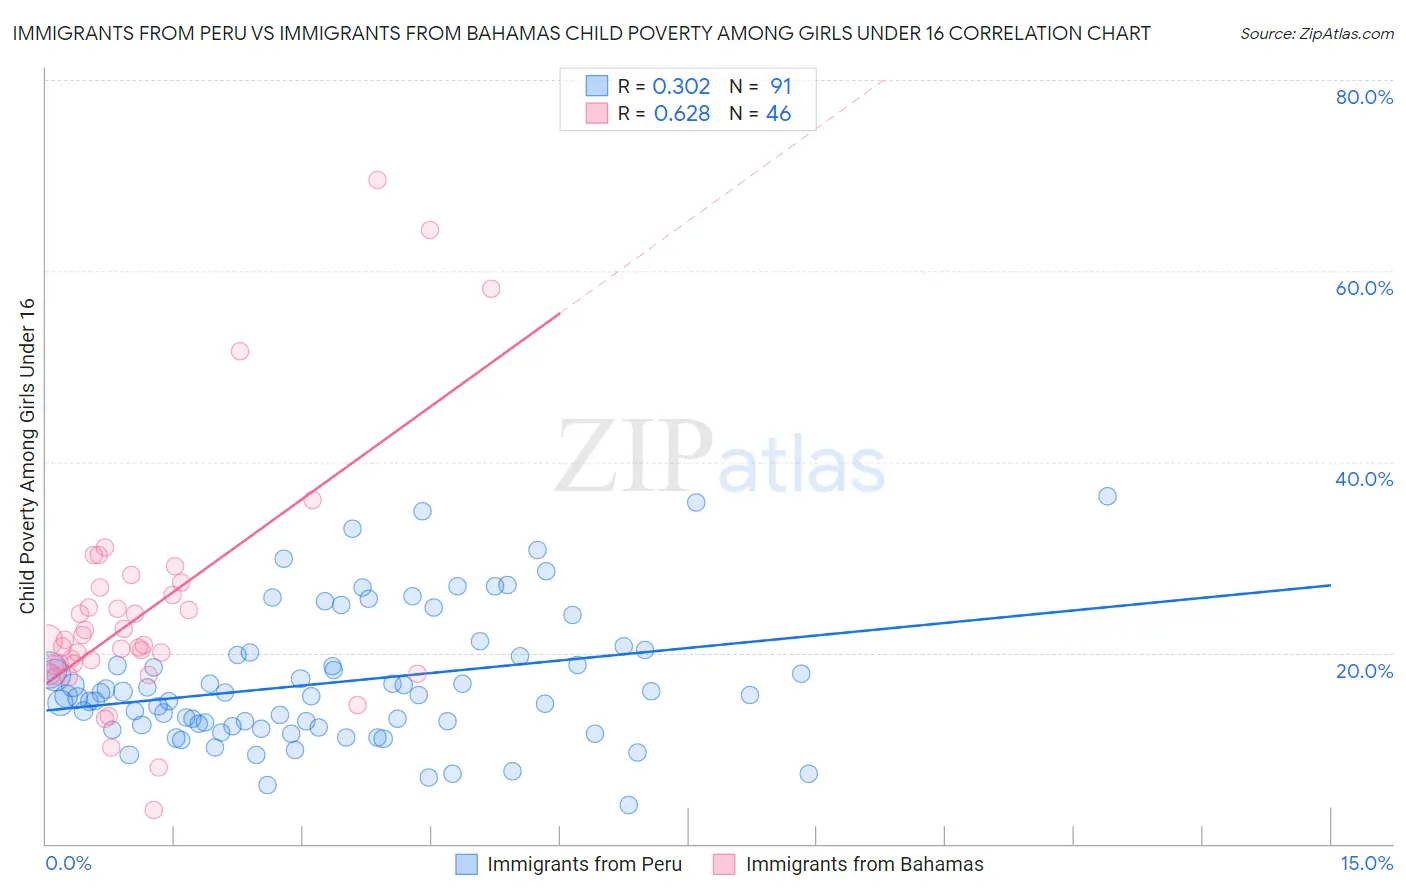 Immigrants from Peru vs Immigrants from Bahamas Child Poverty Among Girls Under 16